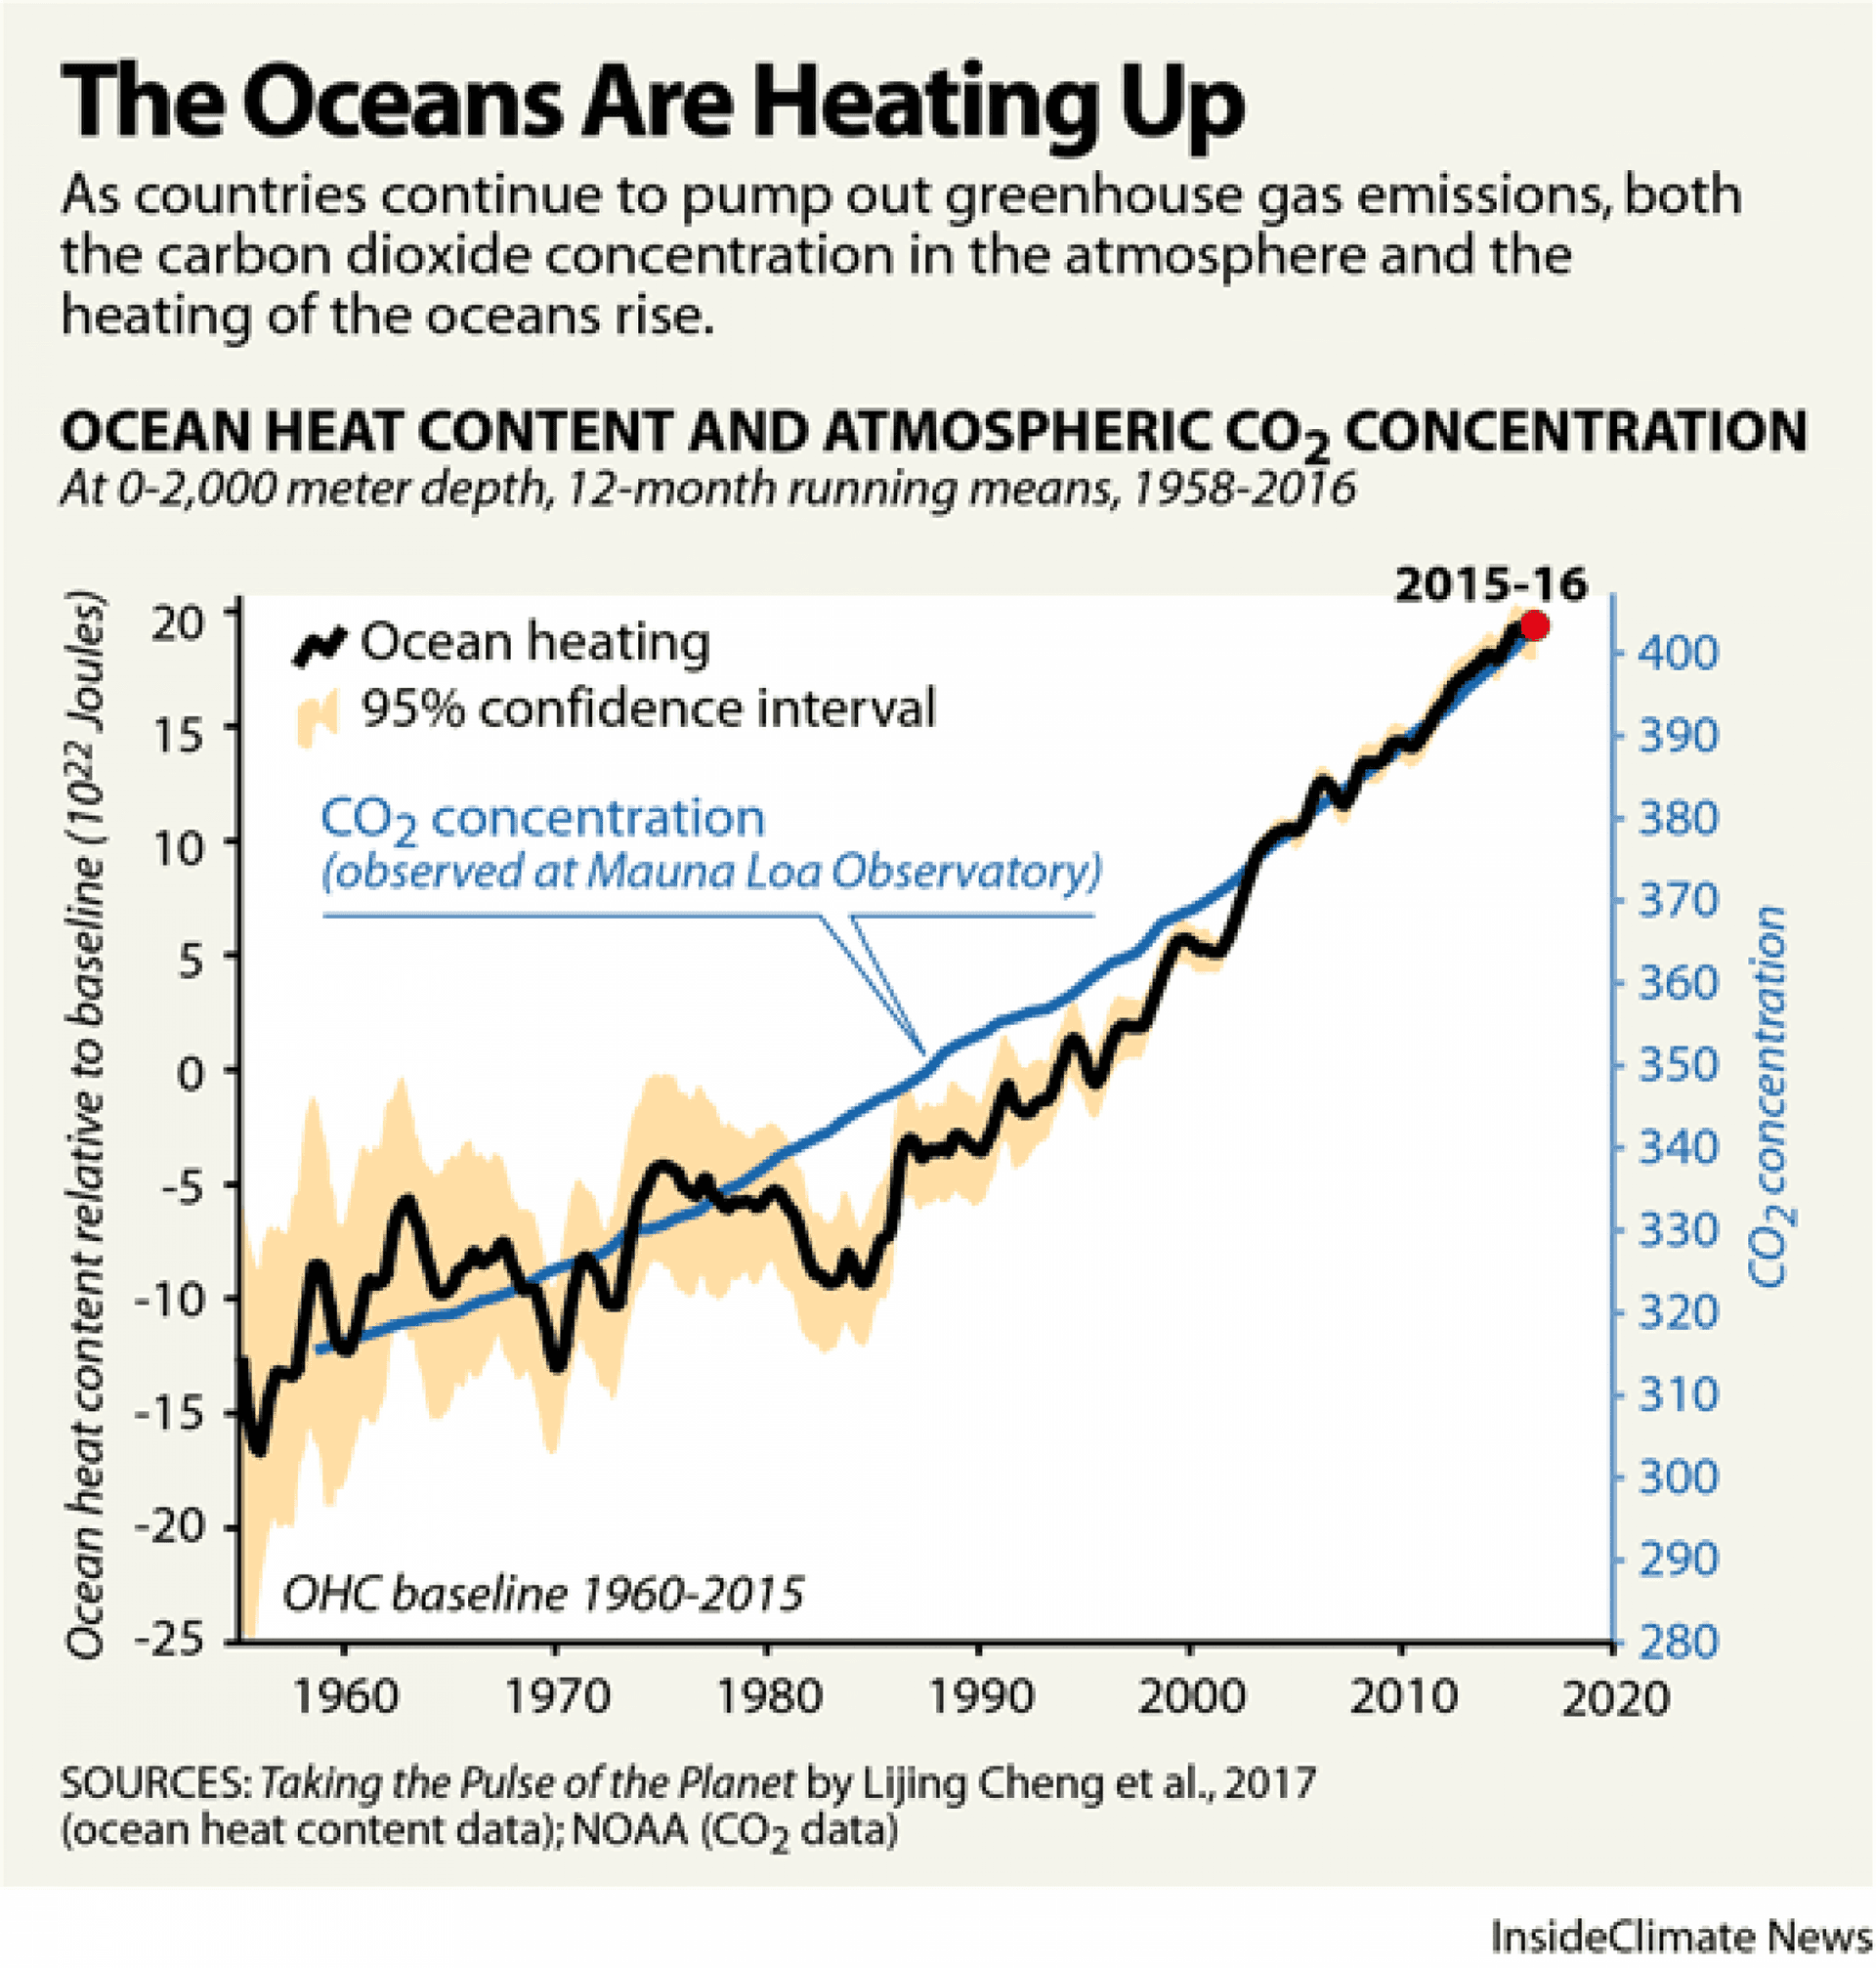 A graph showing the increasing temperature of the oceas over the years.